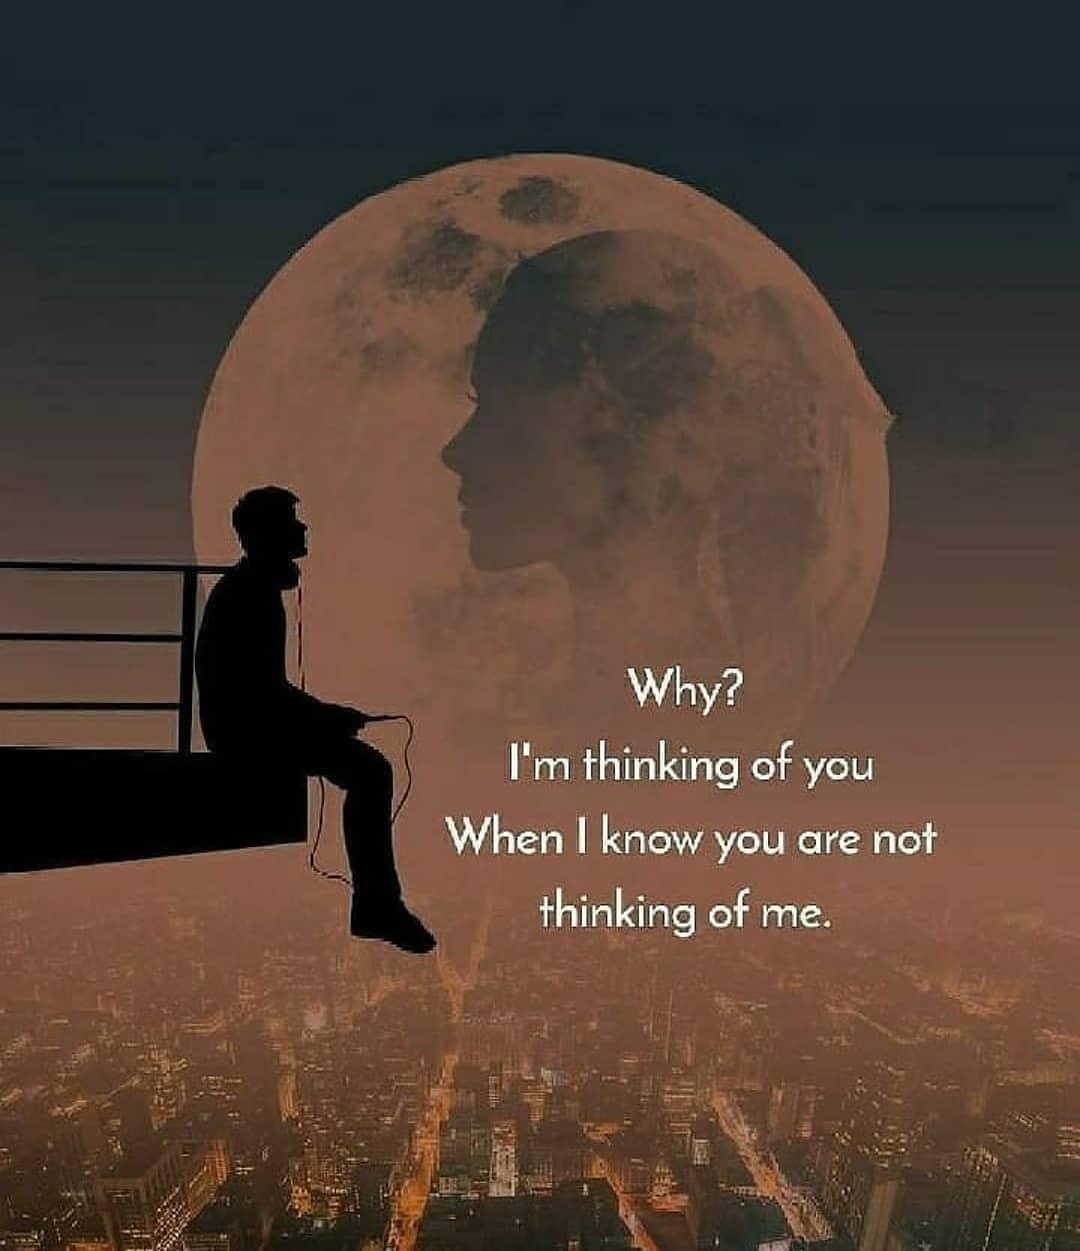 hurt quotes,
pain quotes,
sad quotes about pain,
love hurts quotes,
deep quotes about pain,
love pain quotes,
it hurts quotes,
expectation hurts quotes,
words hurt quotes,
expectation hurts,
feeling hurt quotes,
pain quotes about life,
hurting quotes on relationship,
sad hurt quotes,
hurting status,
hurting images,
pain sad quotes,
hurt pain quotes,
sad quotes about love and pain,
i am sorry quotes for hurting you,
sad quotes about life and pain,
emotional pain quotes,
painful love text messages,